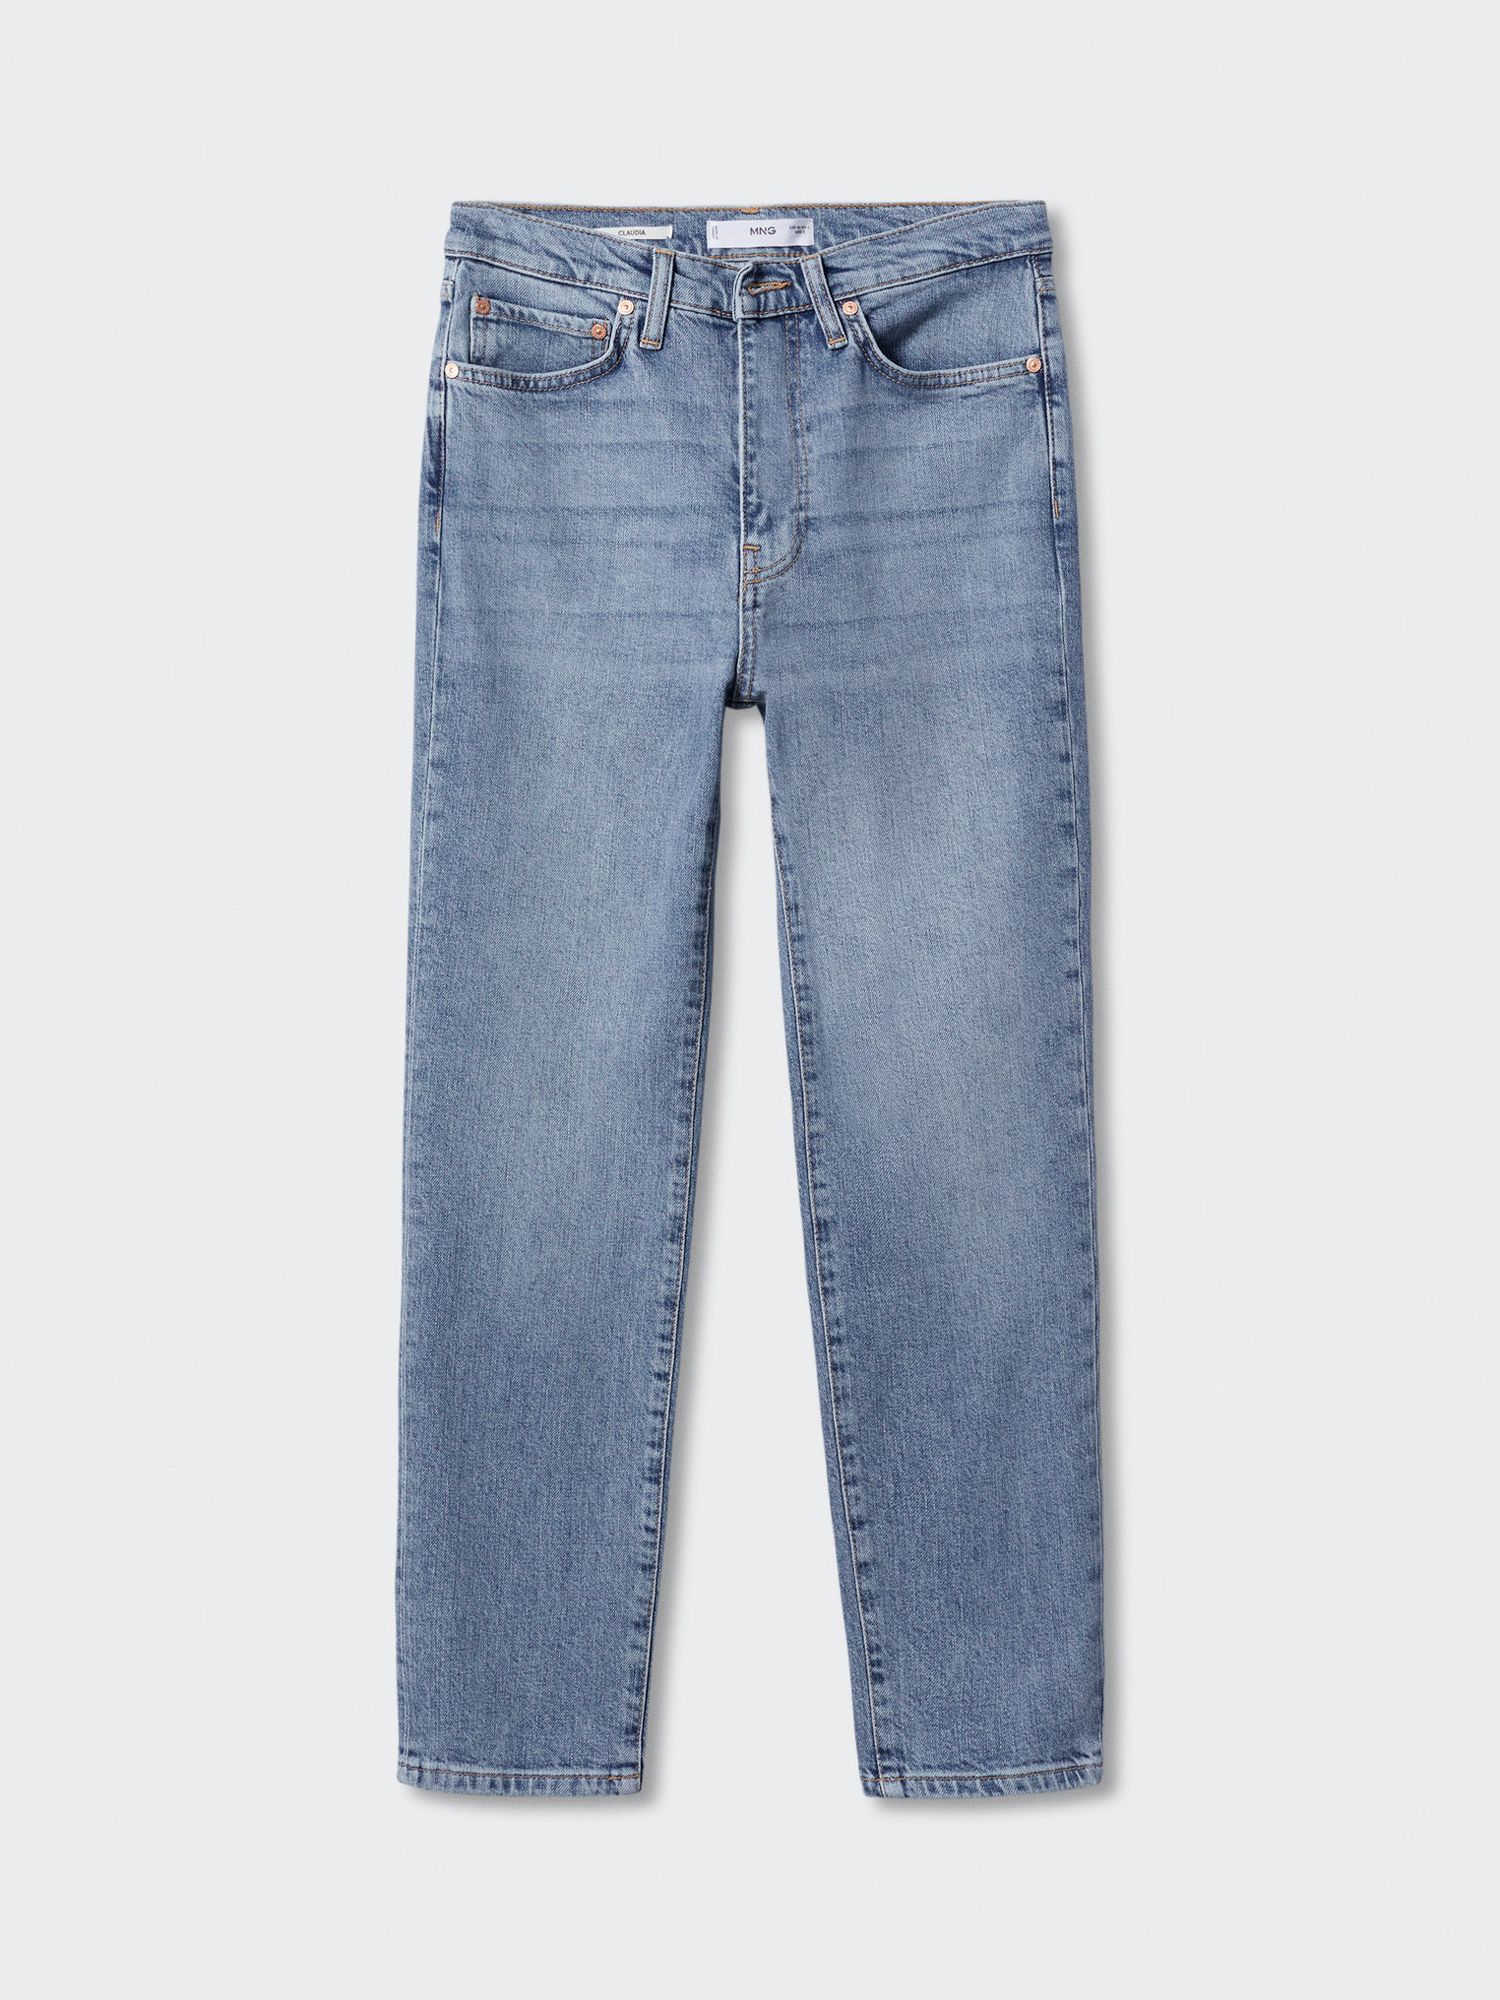 Mango Claudia Slim Fit Cropped Jeans, Light Blue at John Lewis & Partners